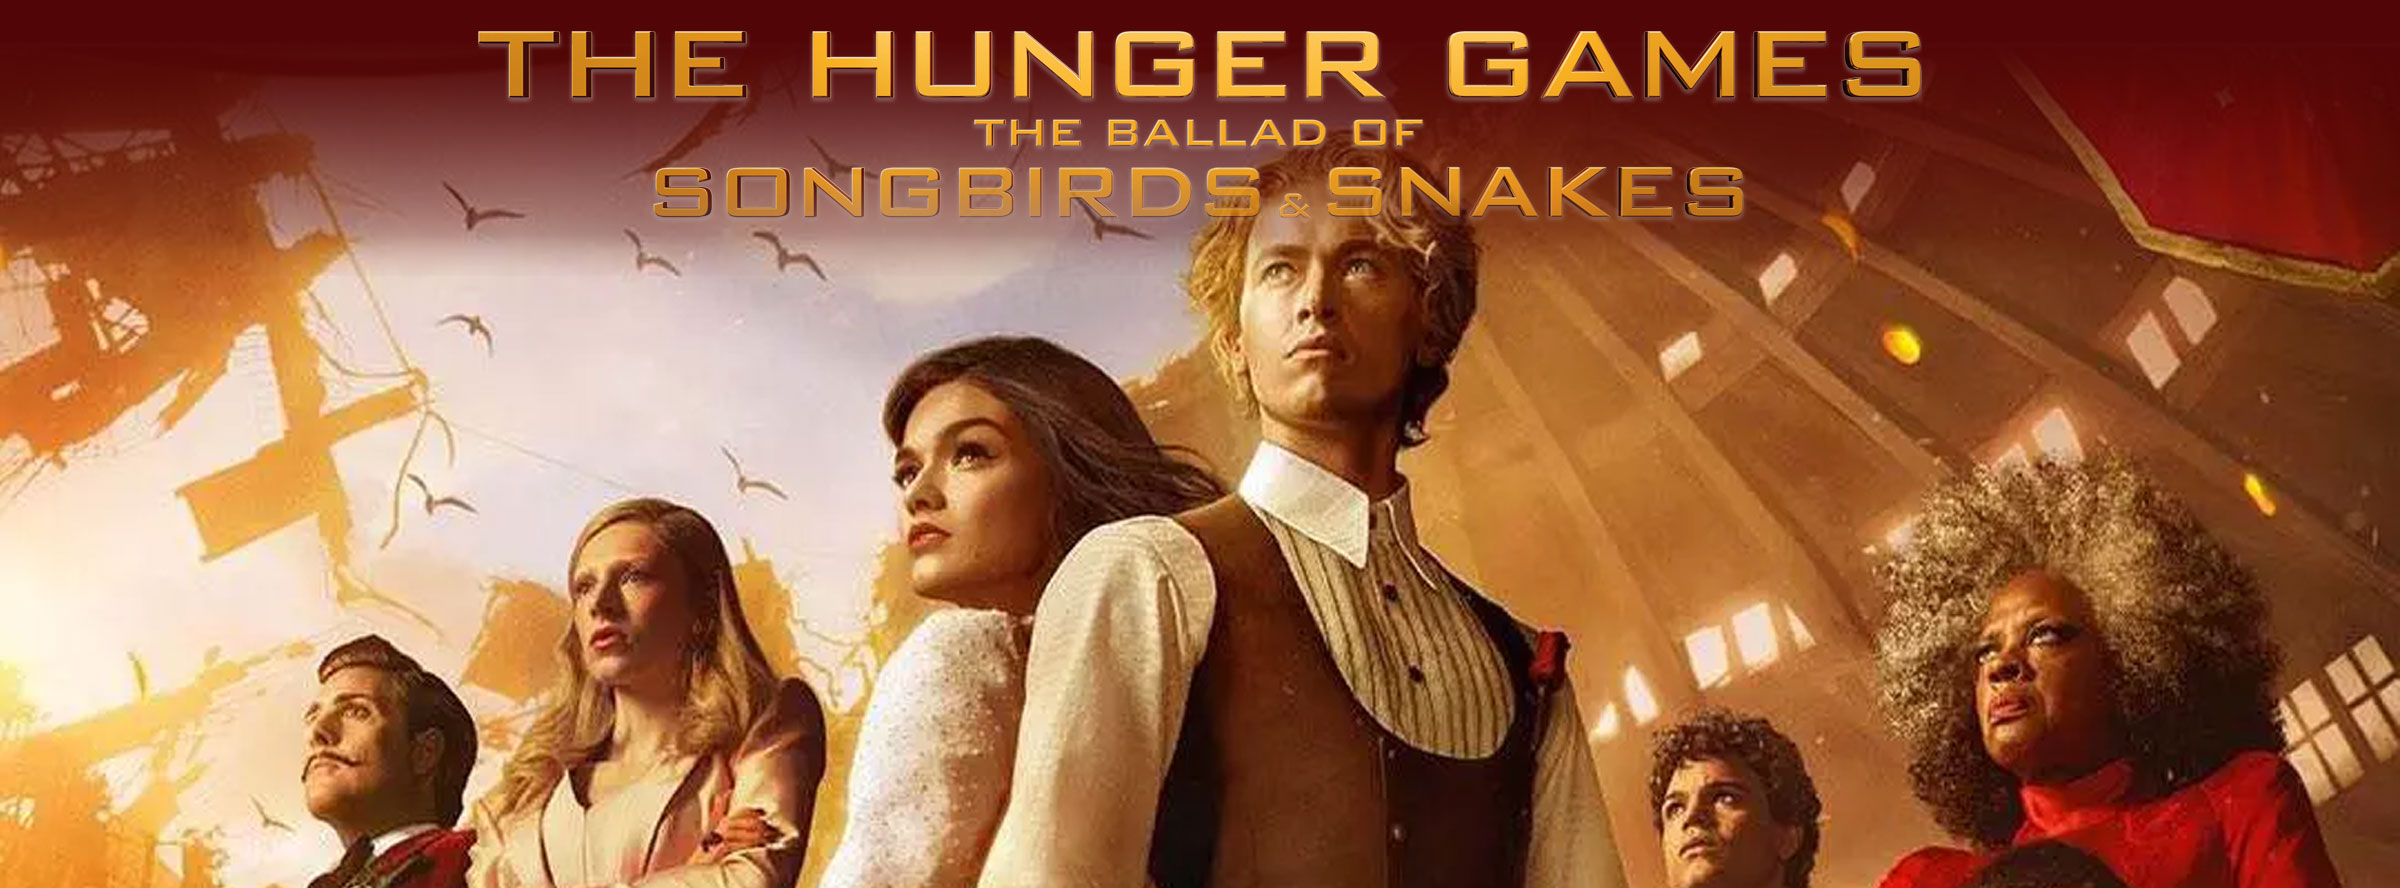 Slider Image for Hunger Games: The Ballad of Songbirds and Snakes,